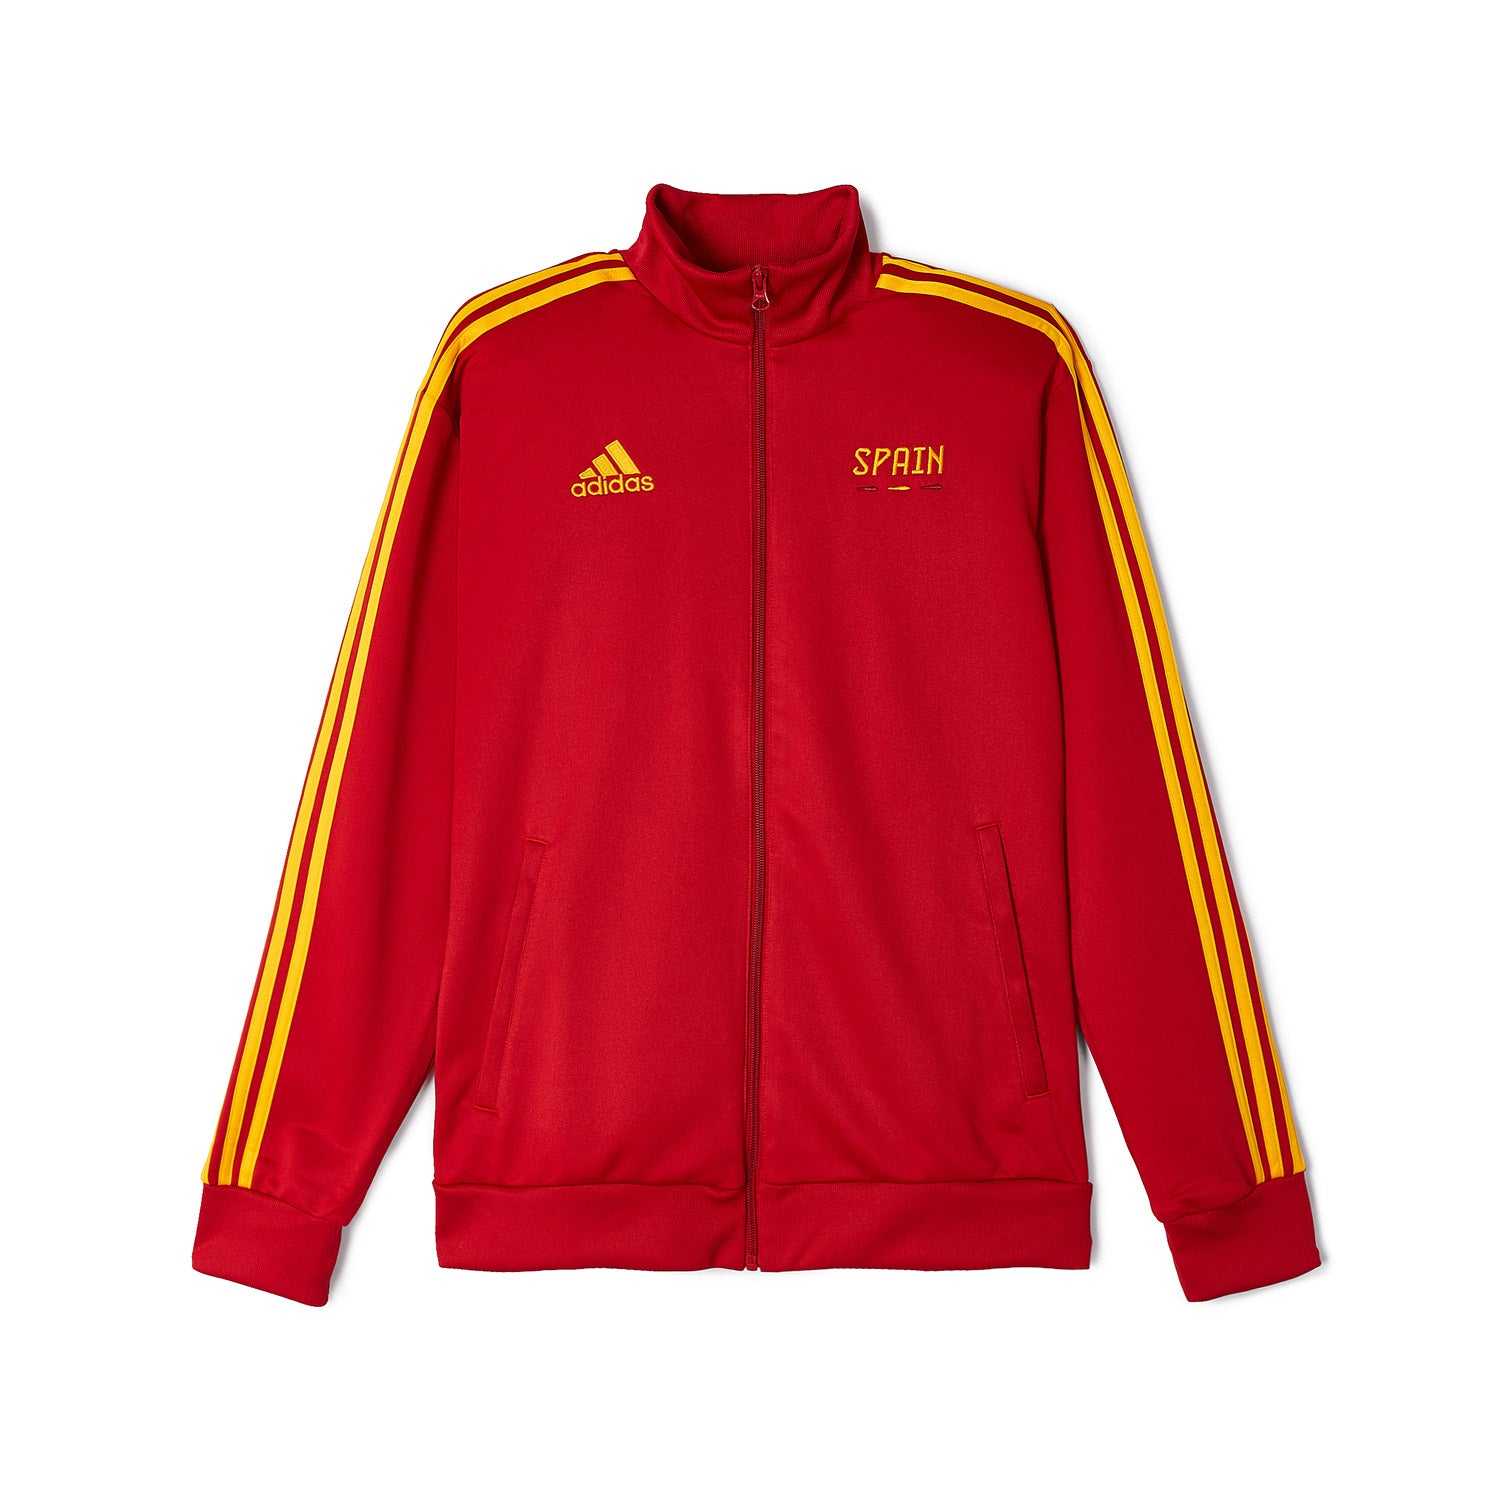 adidas Spain Track Top Red - Mens